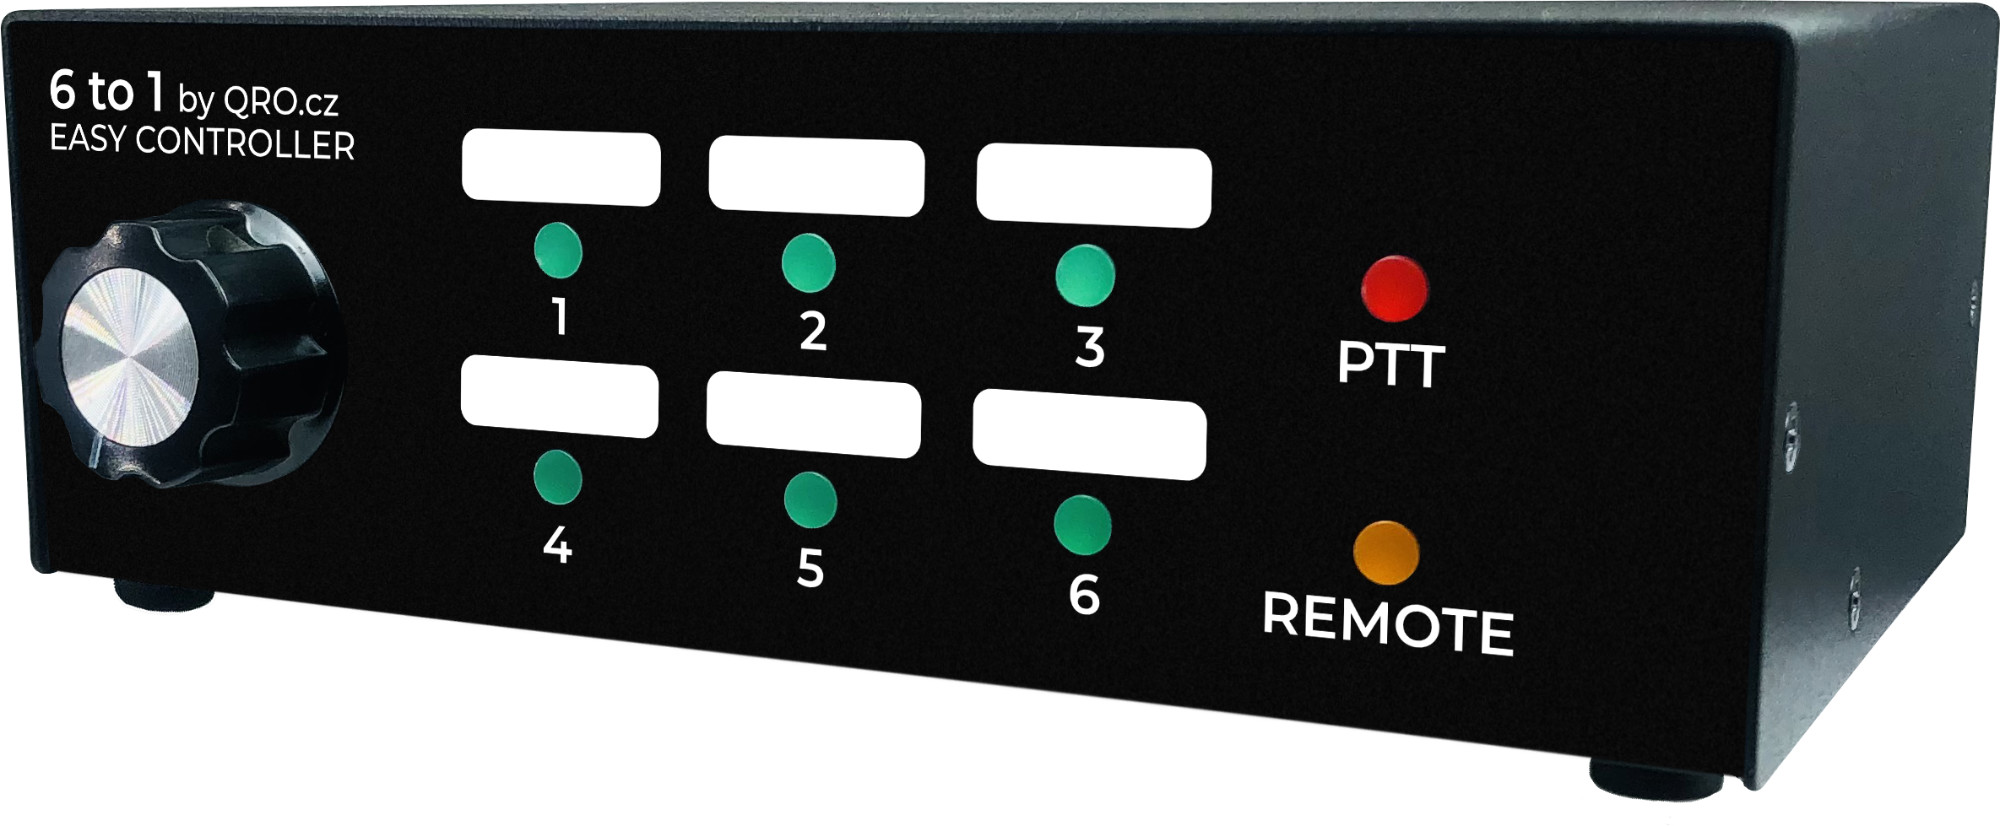 6-1 easy controller for 6 to 1 antenna switch by qro.cz hamparts.shop